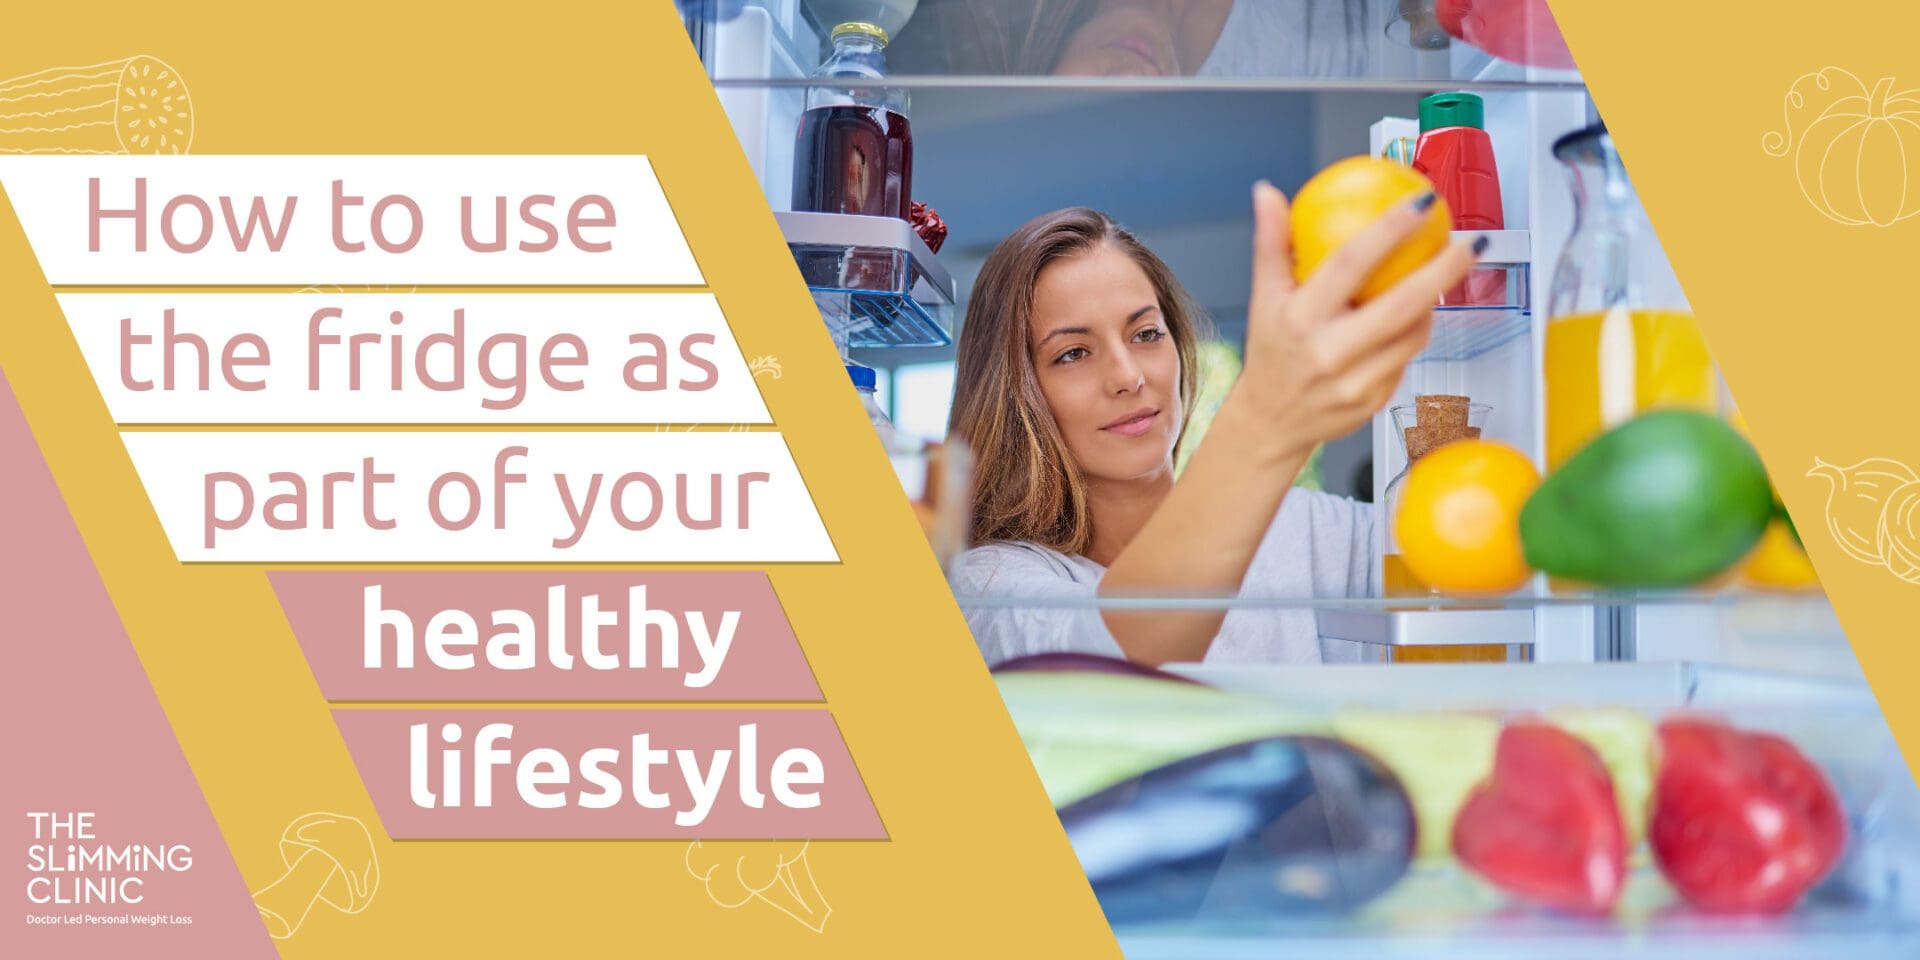 How Your Fridge Can Help You Lose Weight